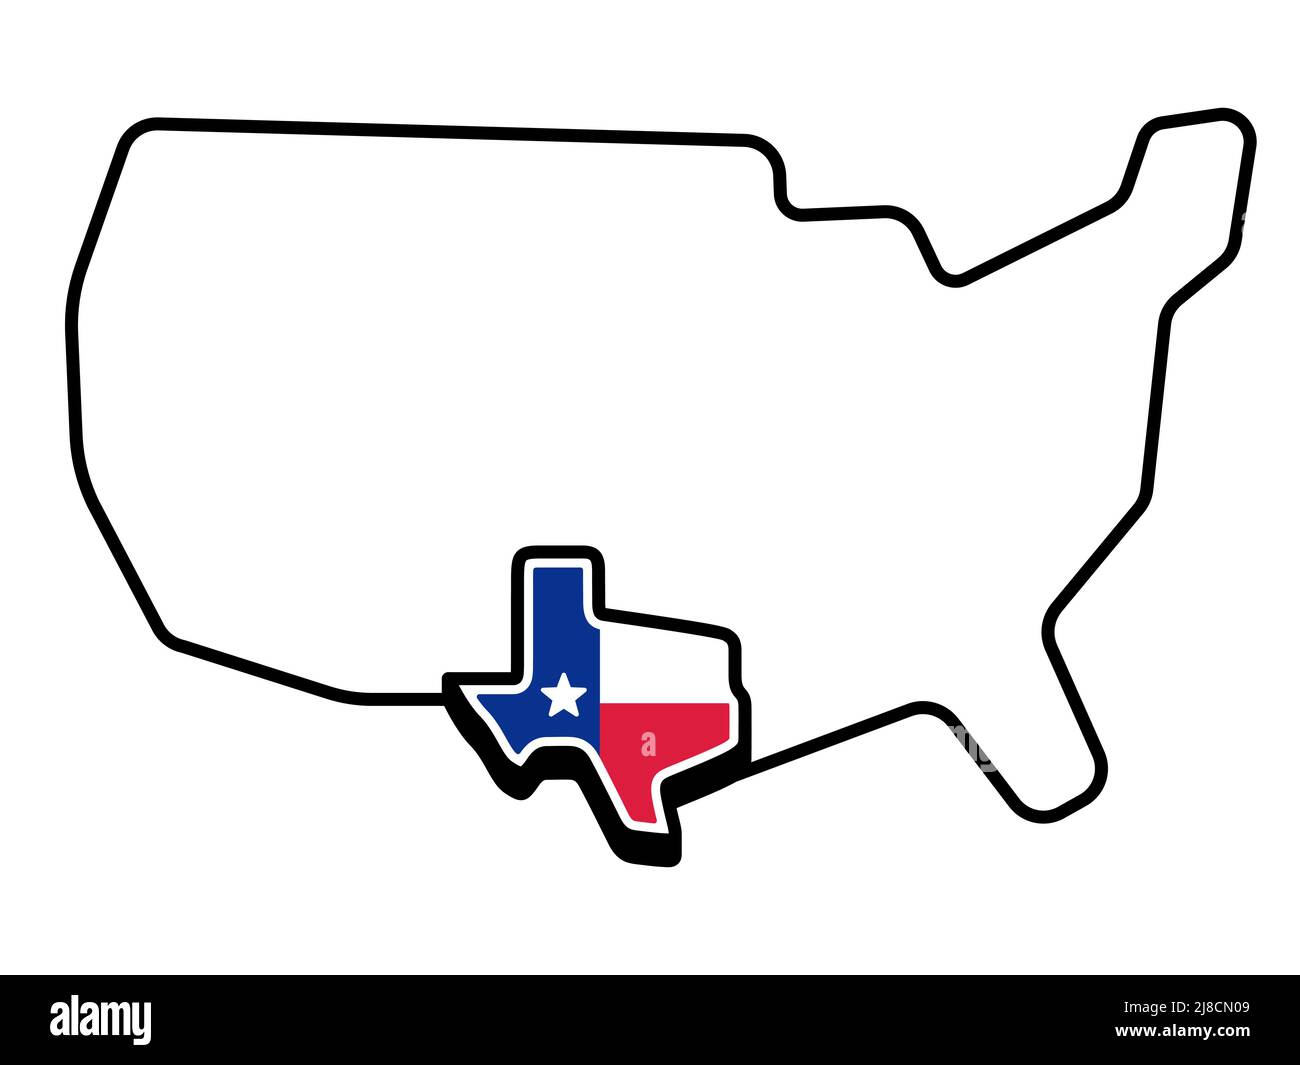 Stylized USA map with Texas state outline and flag. Vector clip art illustration. Stock Vector